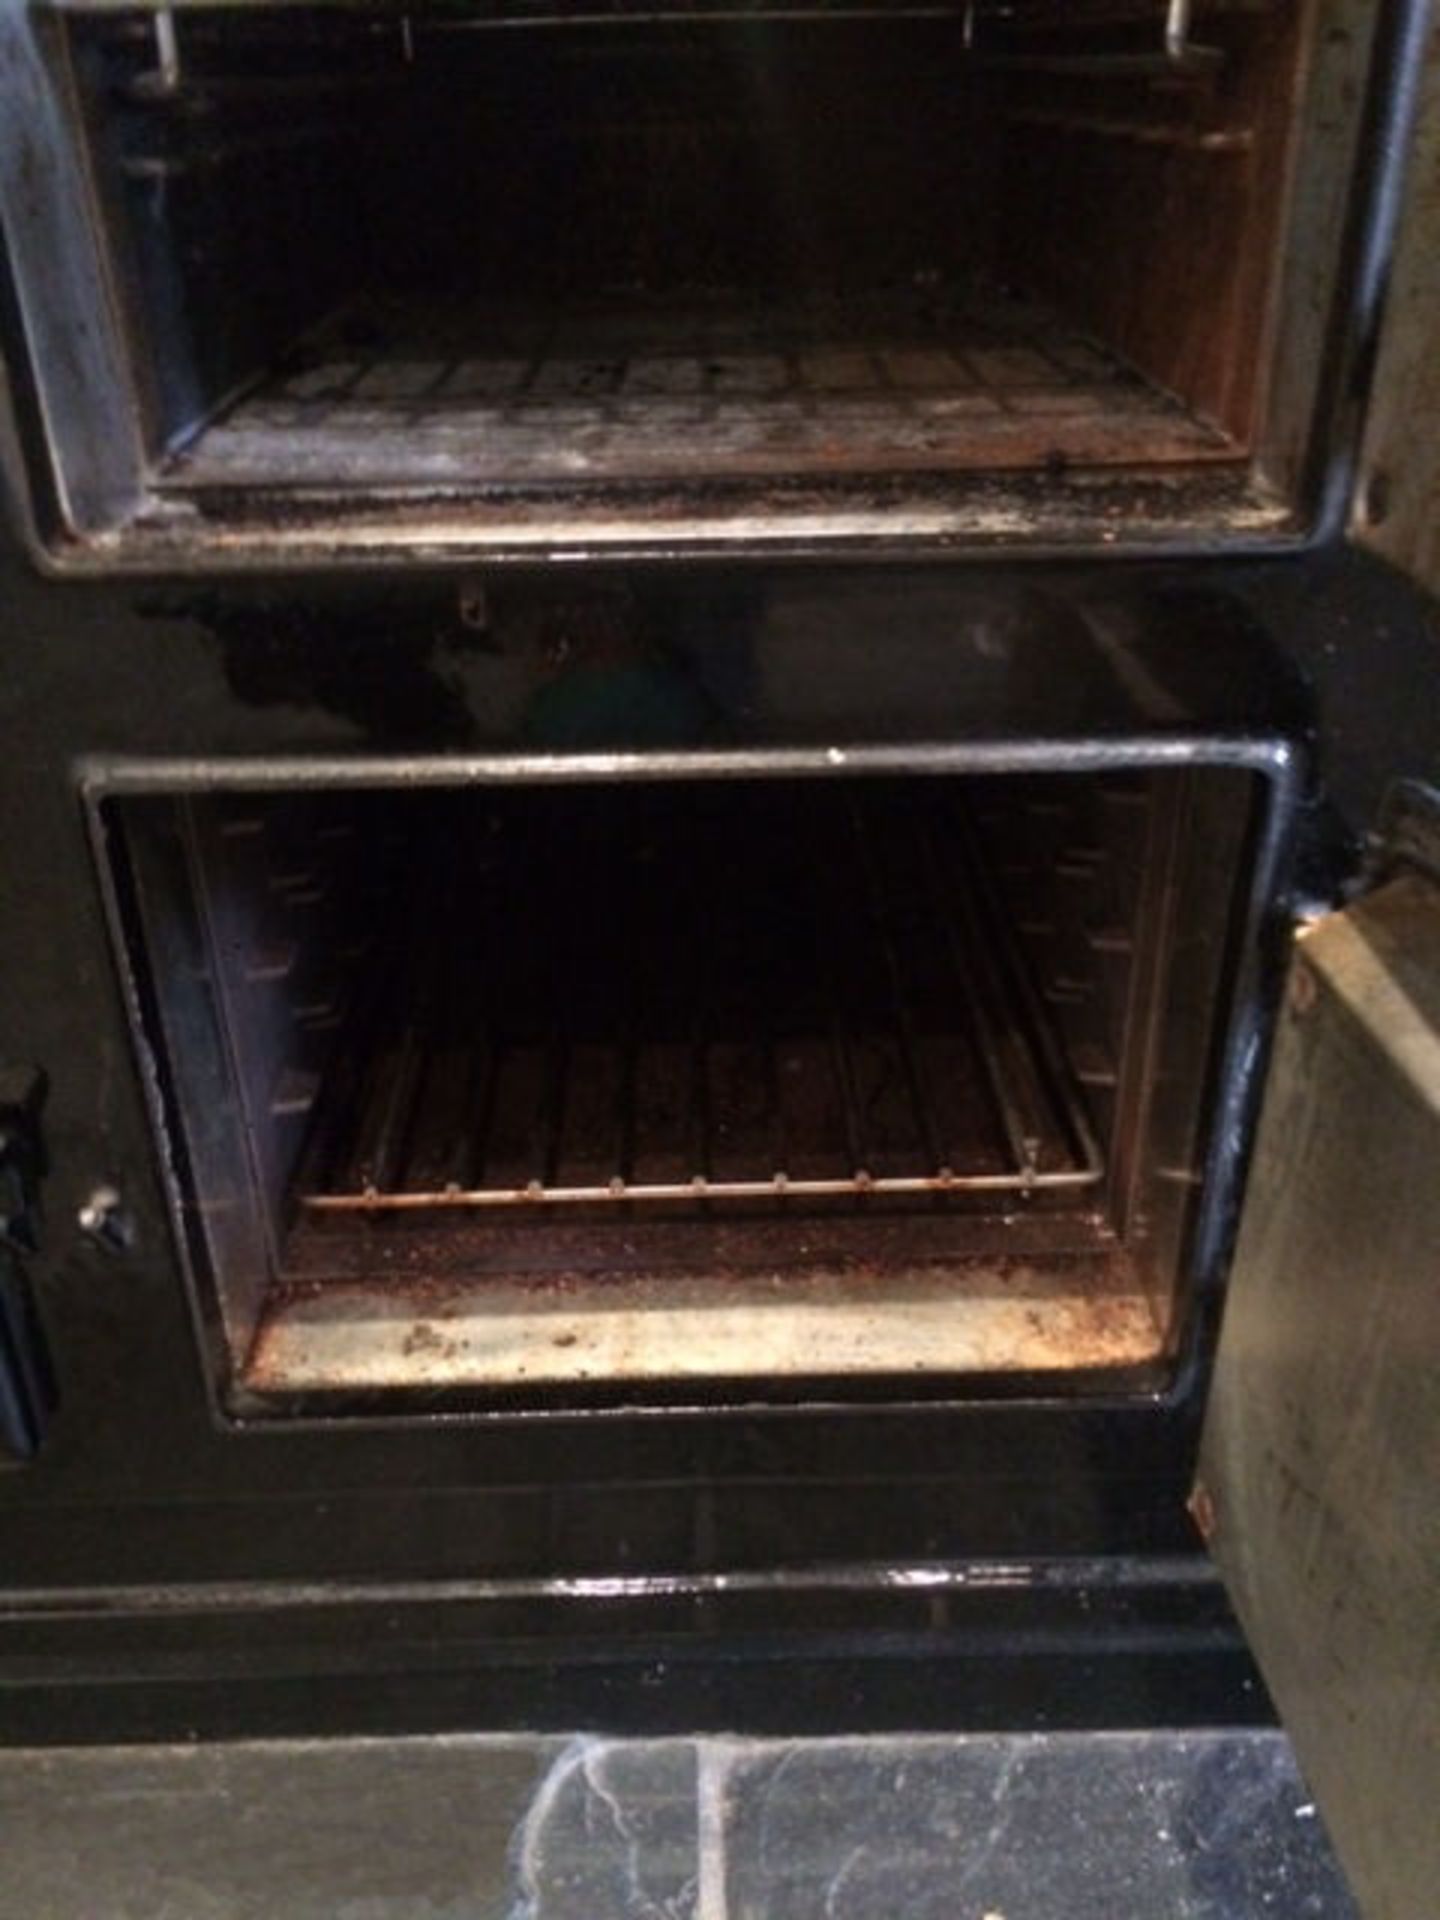 1 x Aga 2-Oven Gas Range Cooker - Cast Iron With Black Enamel Finish - Preowned In Good Working Cond - Image 6 of 10